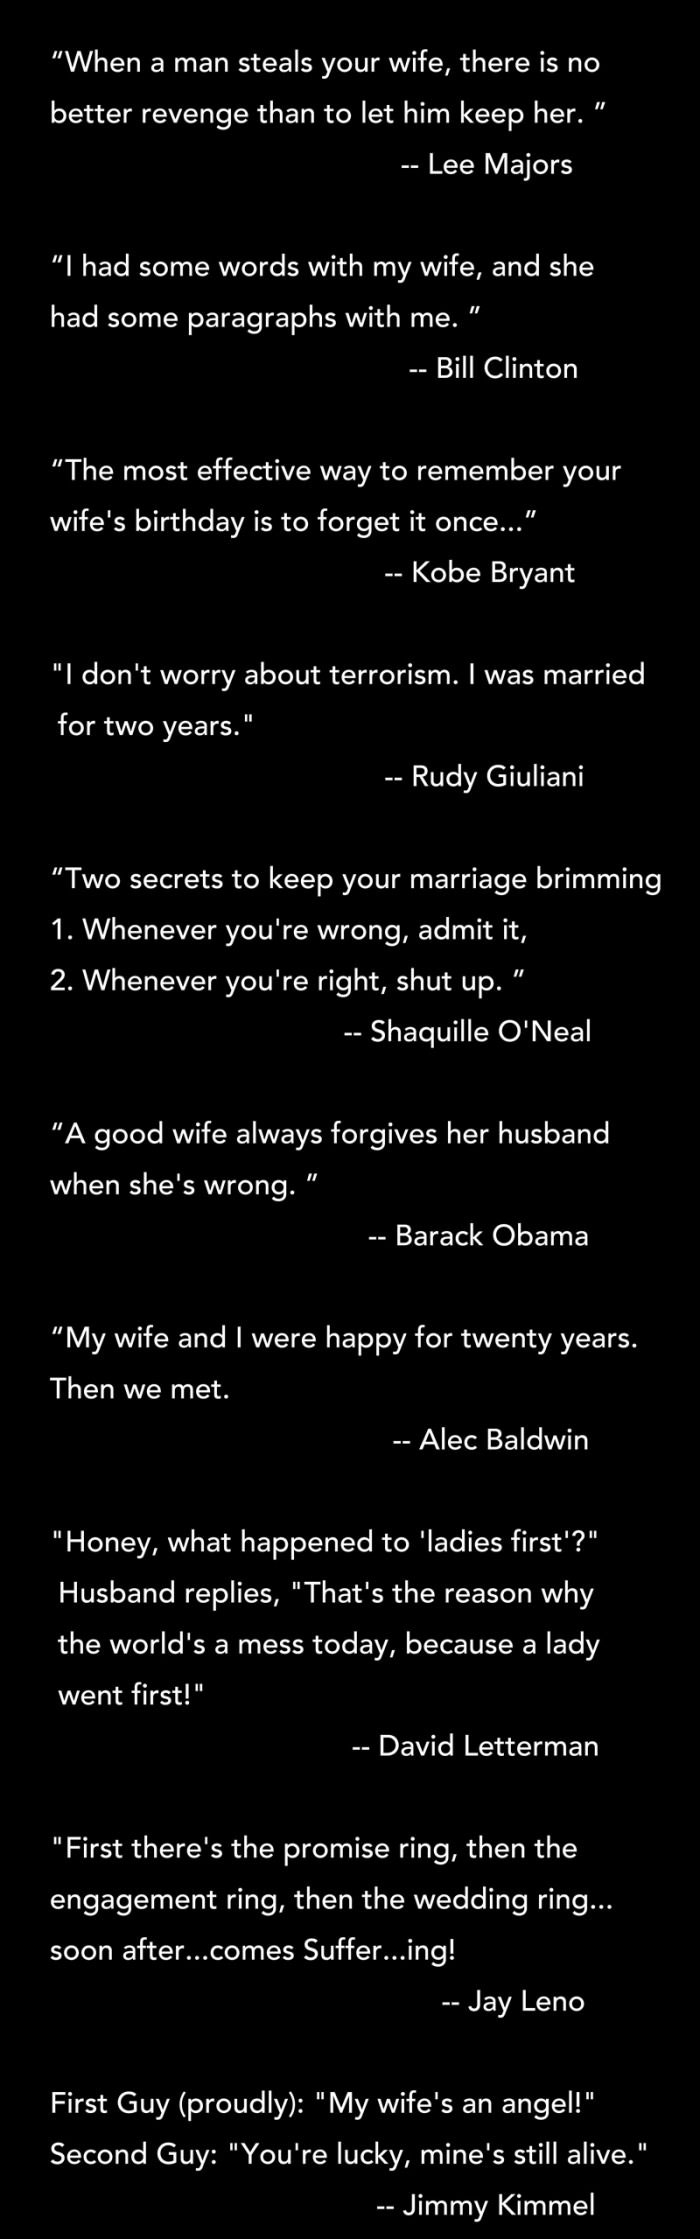 celebrities and their views on marriage and wives, lol, joke